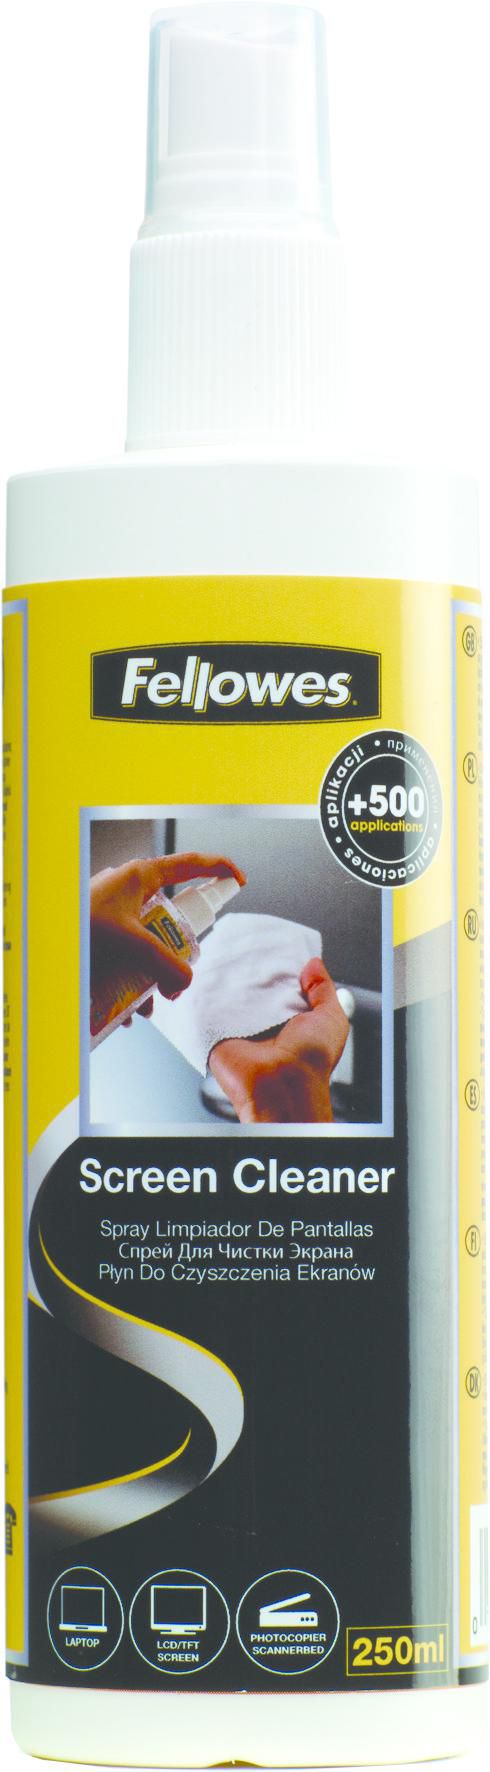 Fellowes 9971806 W128254172 Screen Cleaning Spray 